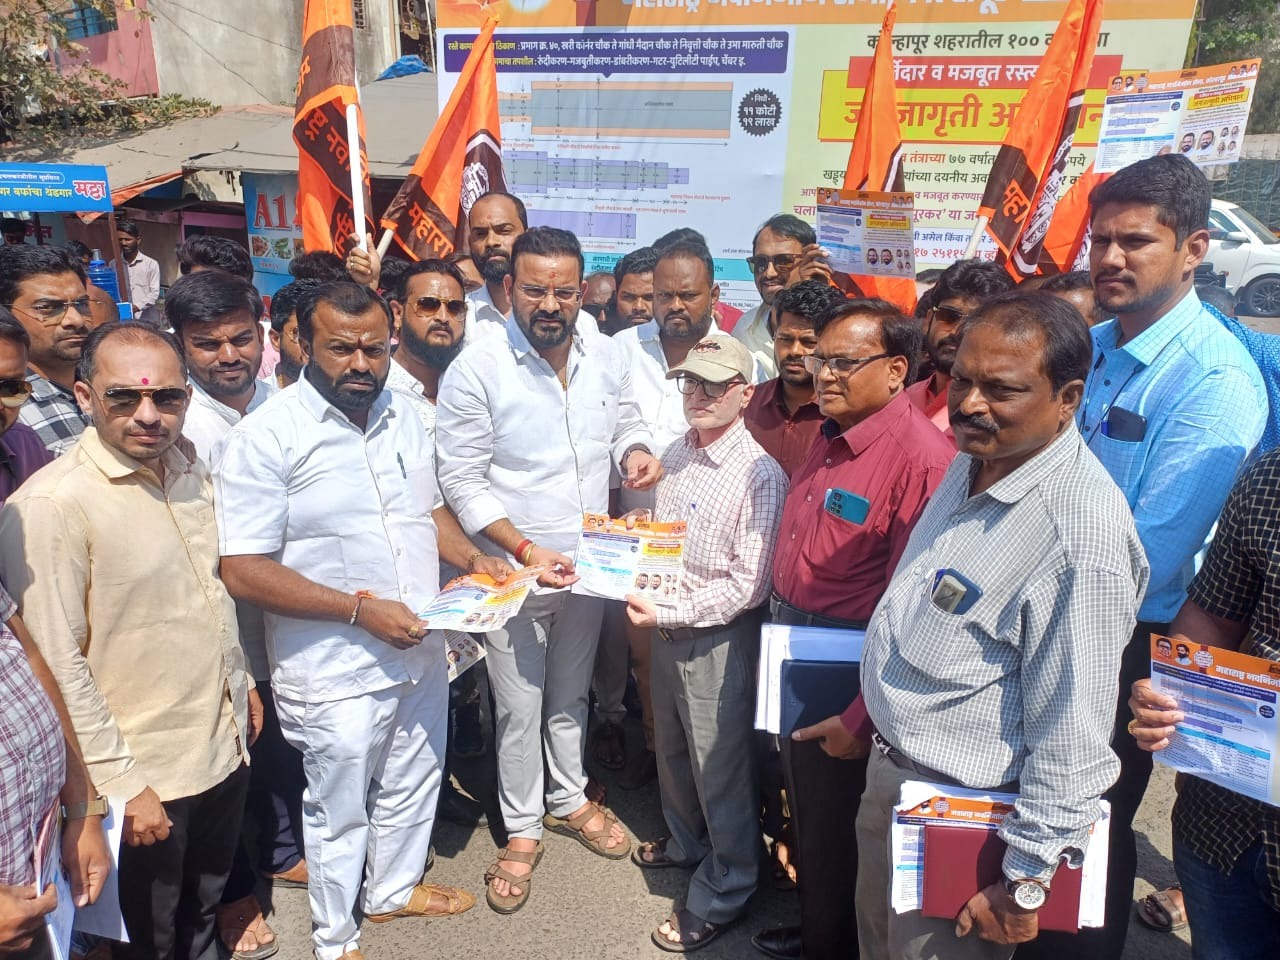 Awareness campaign by MNS Kolhapur for quality and strength of roads with a fund of 100 crores